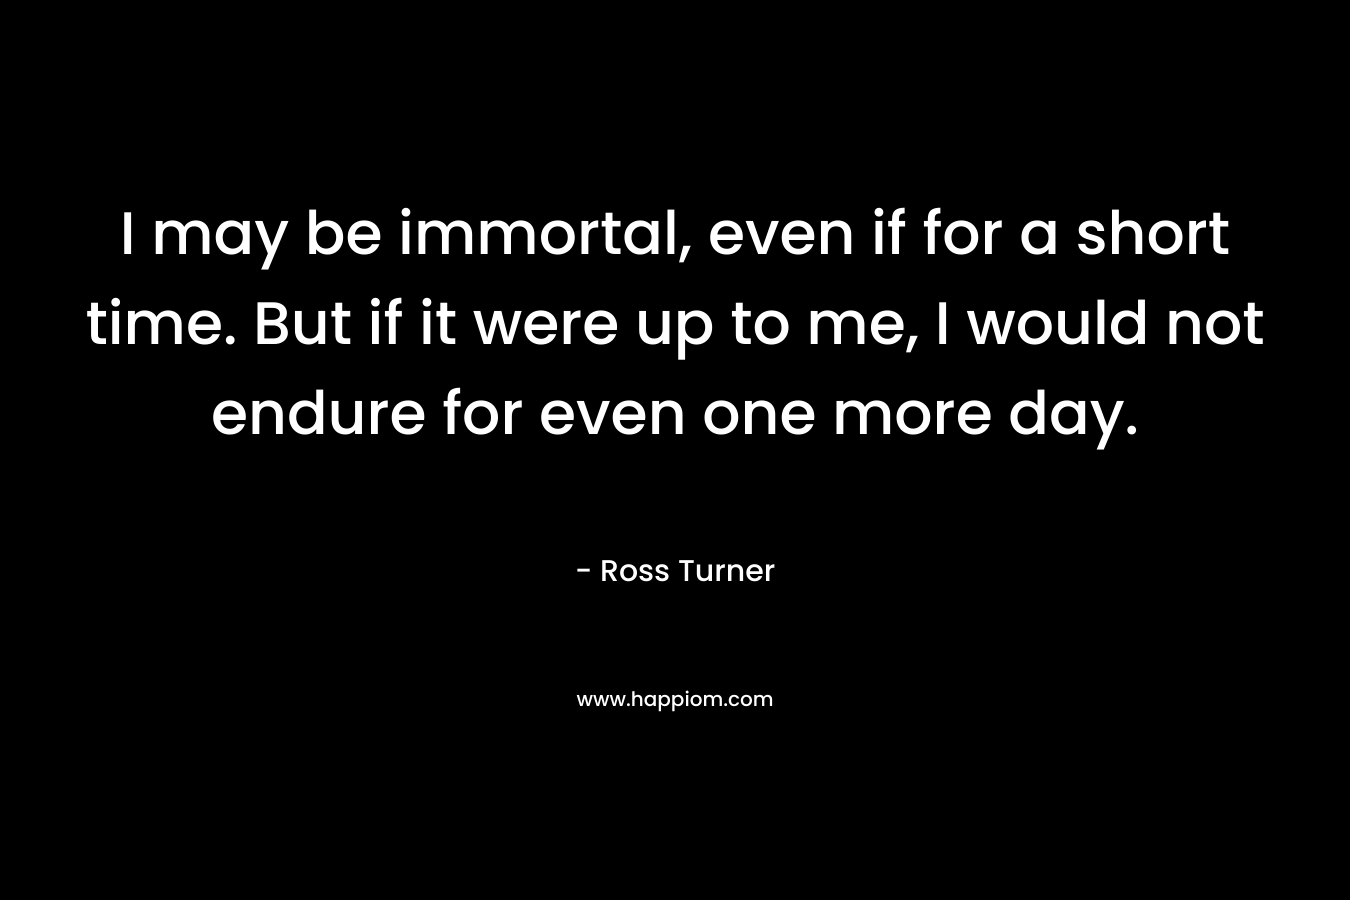 I may be immortal, even if for a short time. But if it were up to me, I would not endure for even one more day.